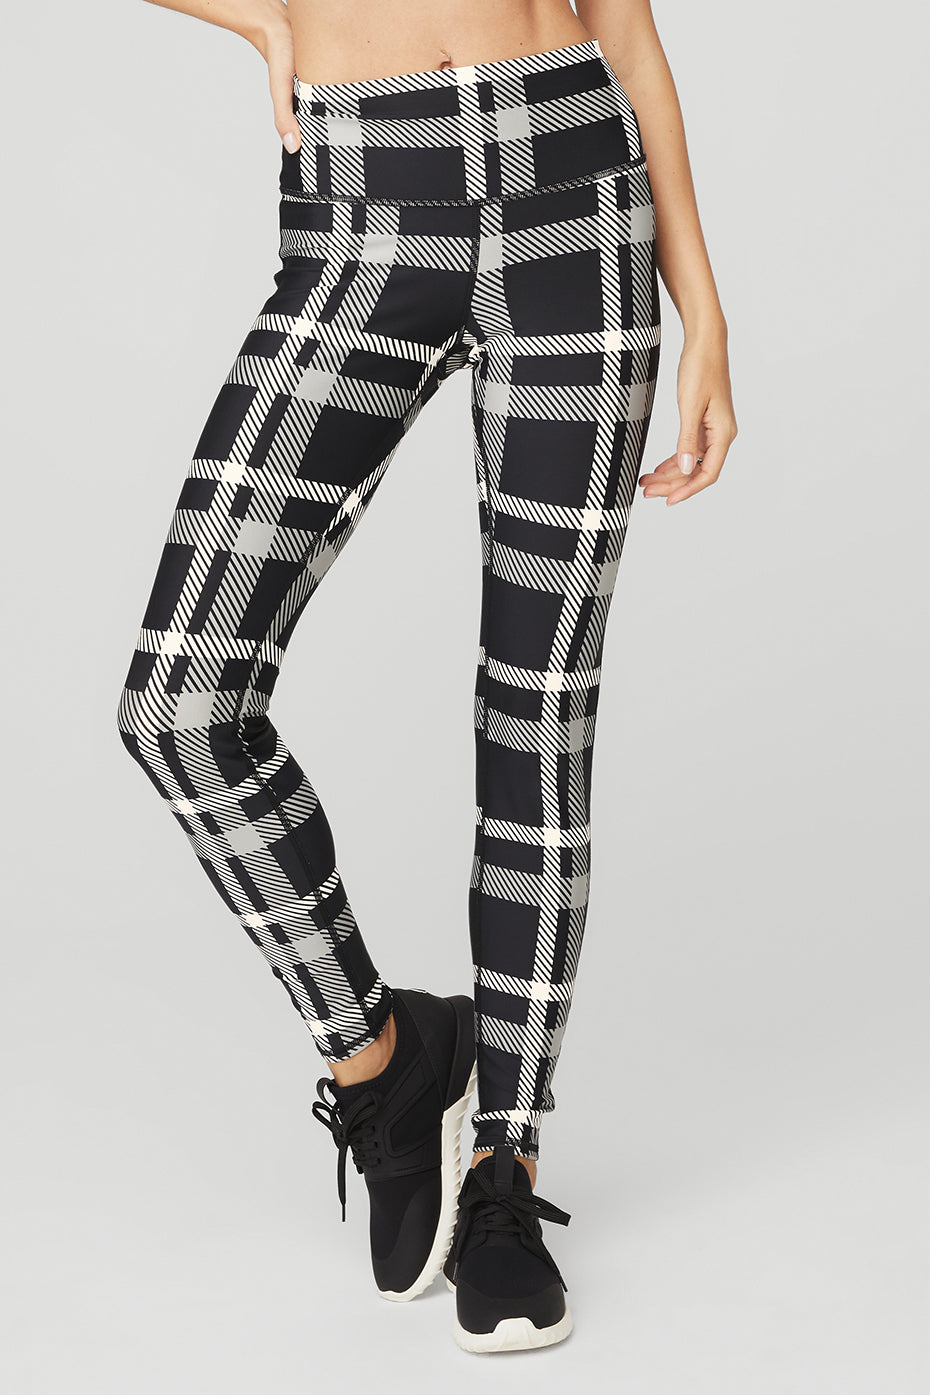 Airlift High-Waist Magnified Plaid Legging in Black/Ivory by Alo Yoga